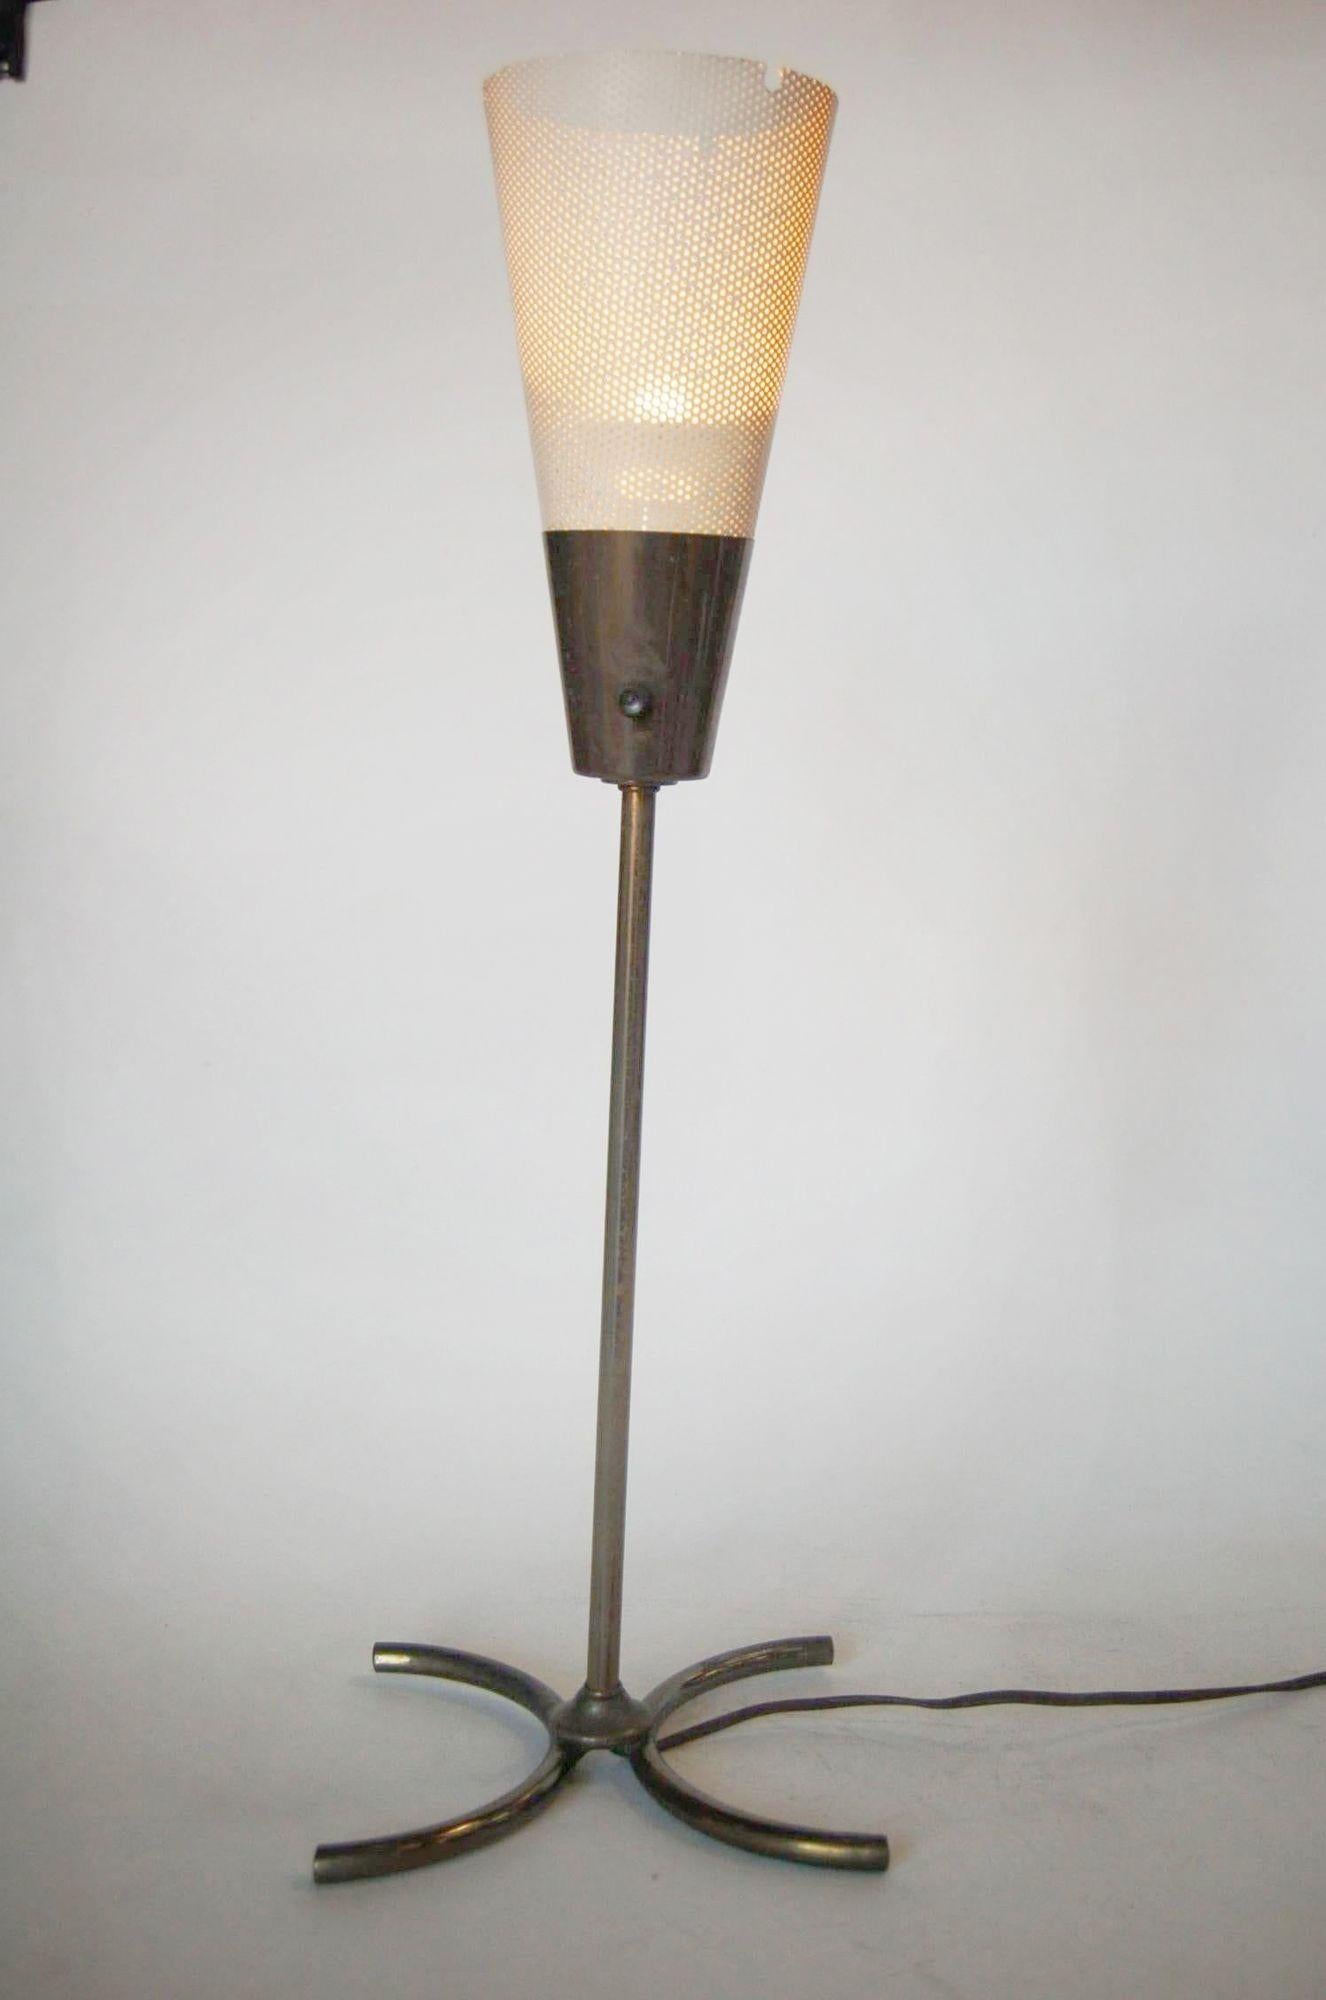 Unique Googie brass and white enamel freestanding torchiere table lamp with perforated cone shade.

Measures: 8